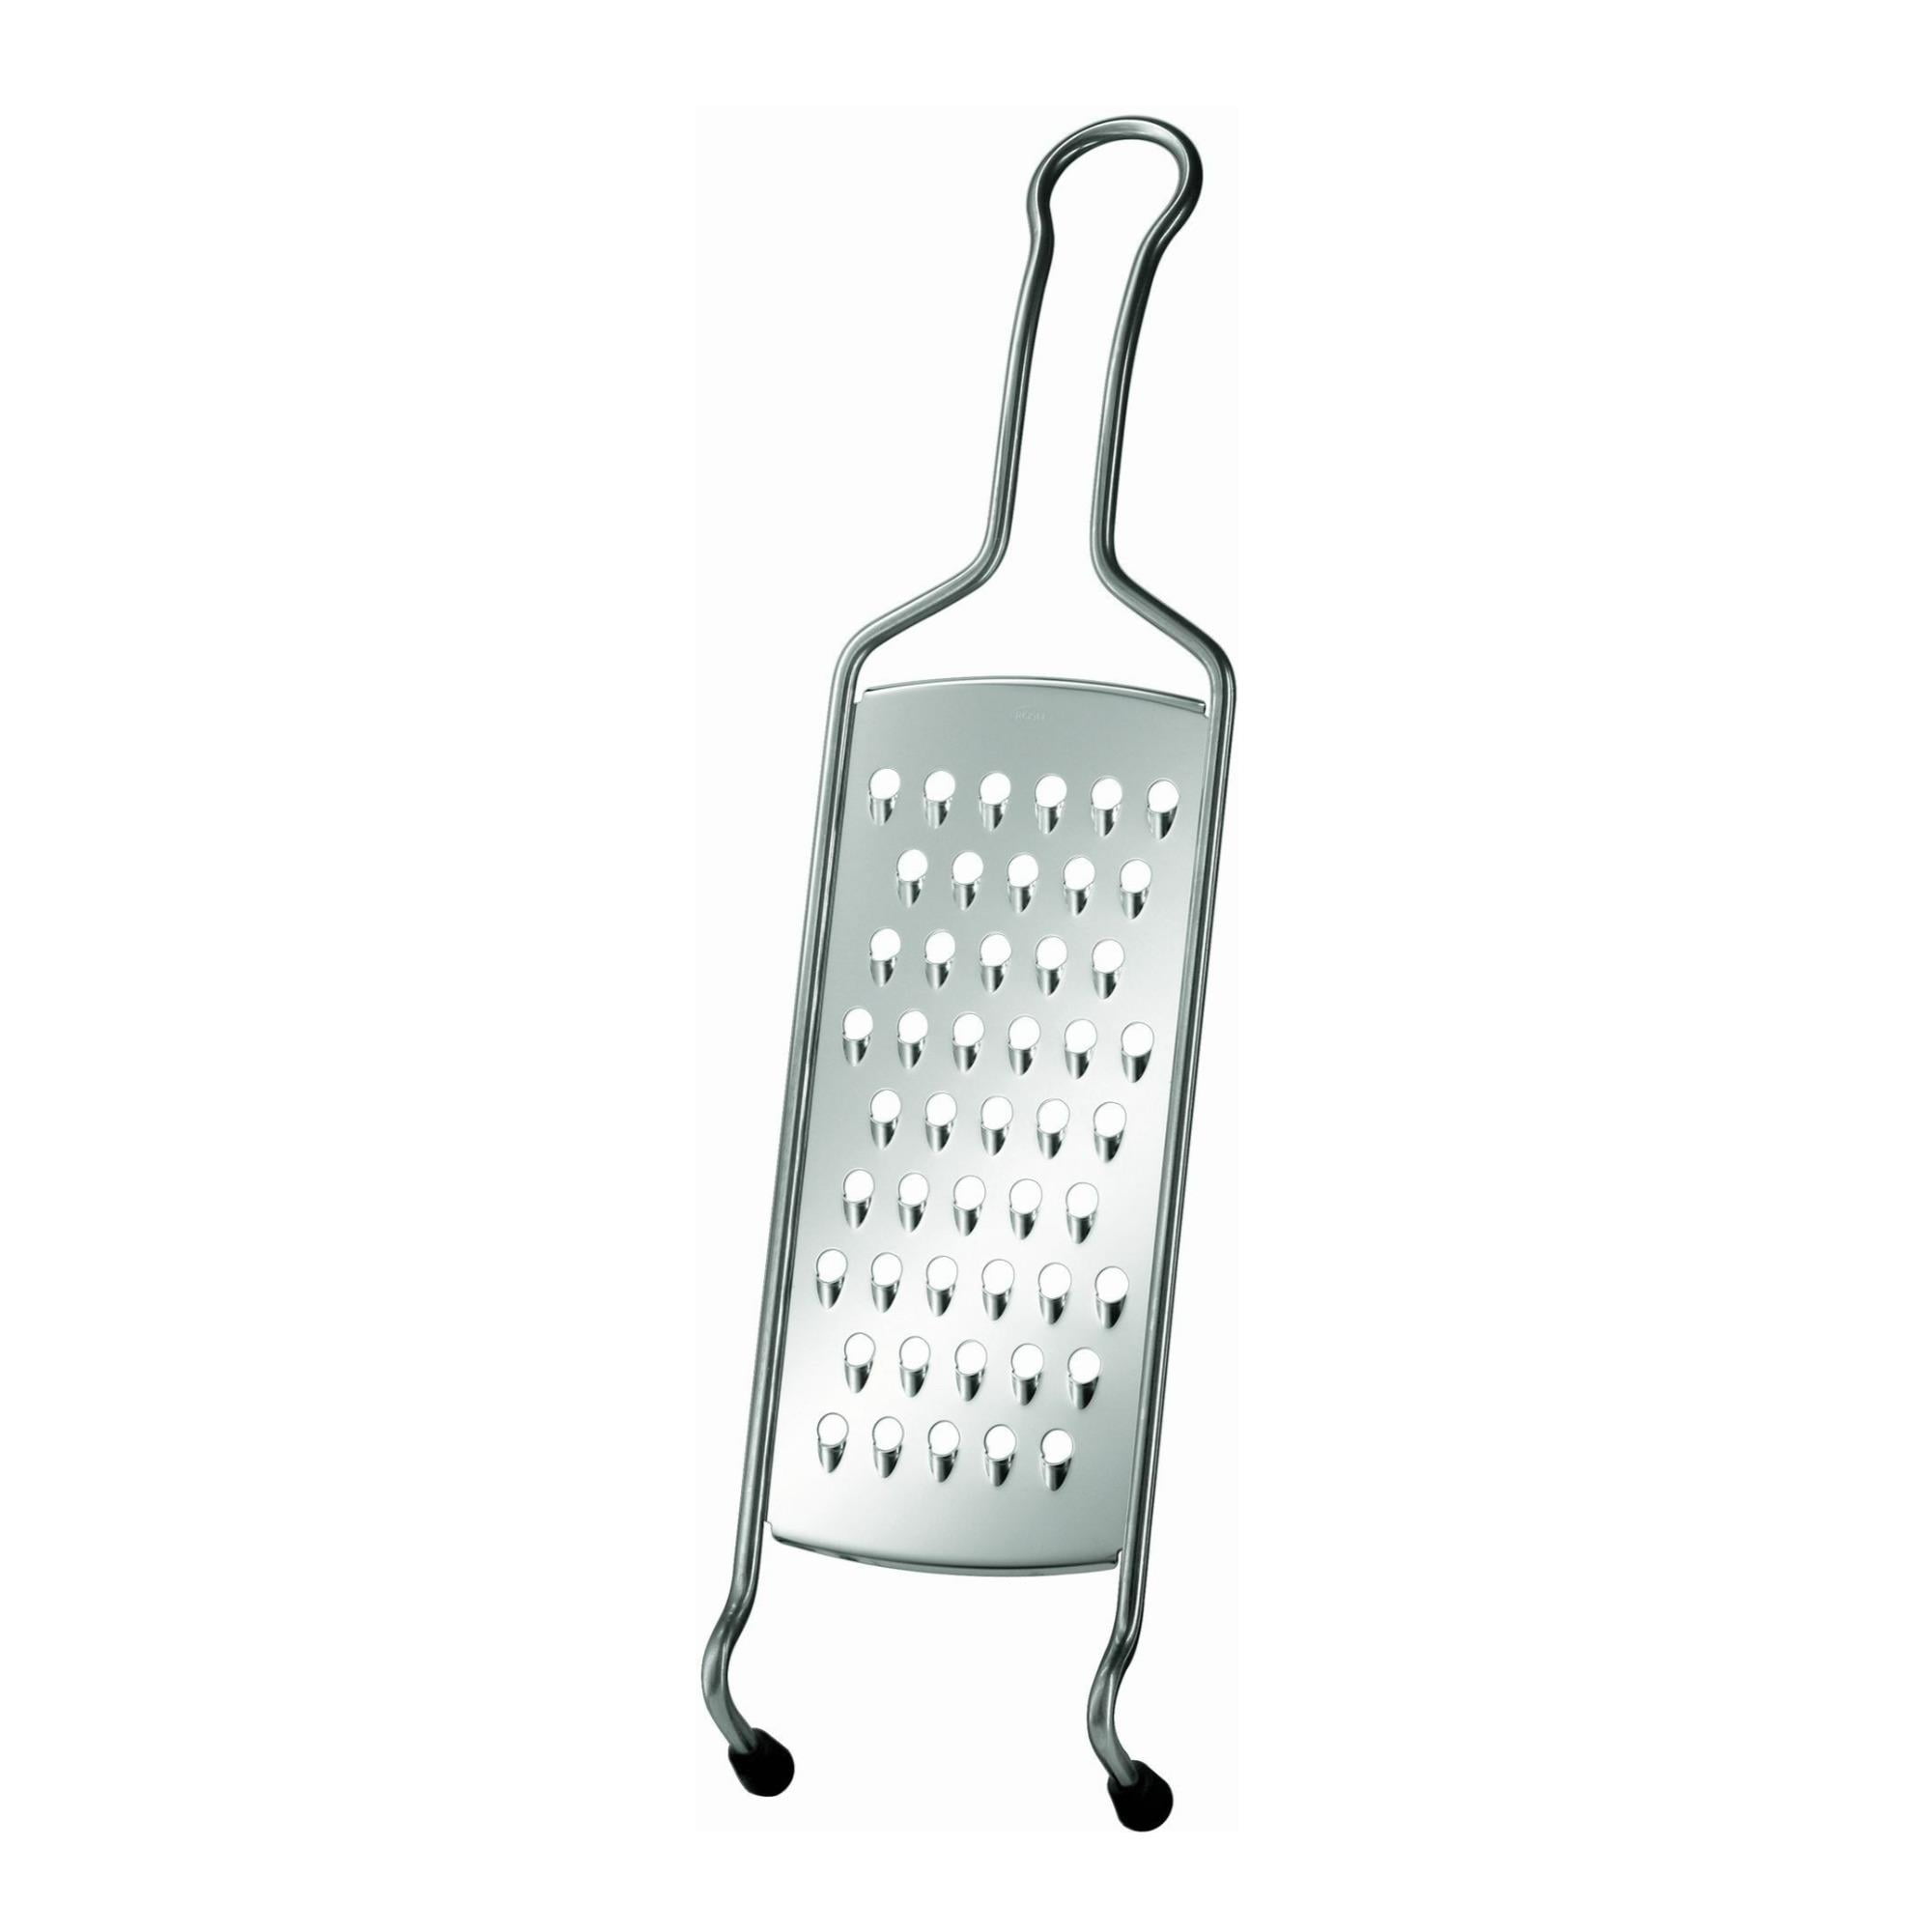 Easy Butter Grater Spreadable Butter Mill Kitchen Grater NEW Sell K9T3 